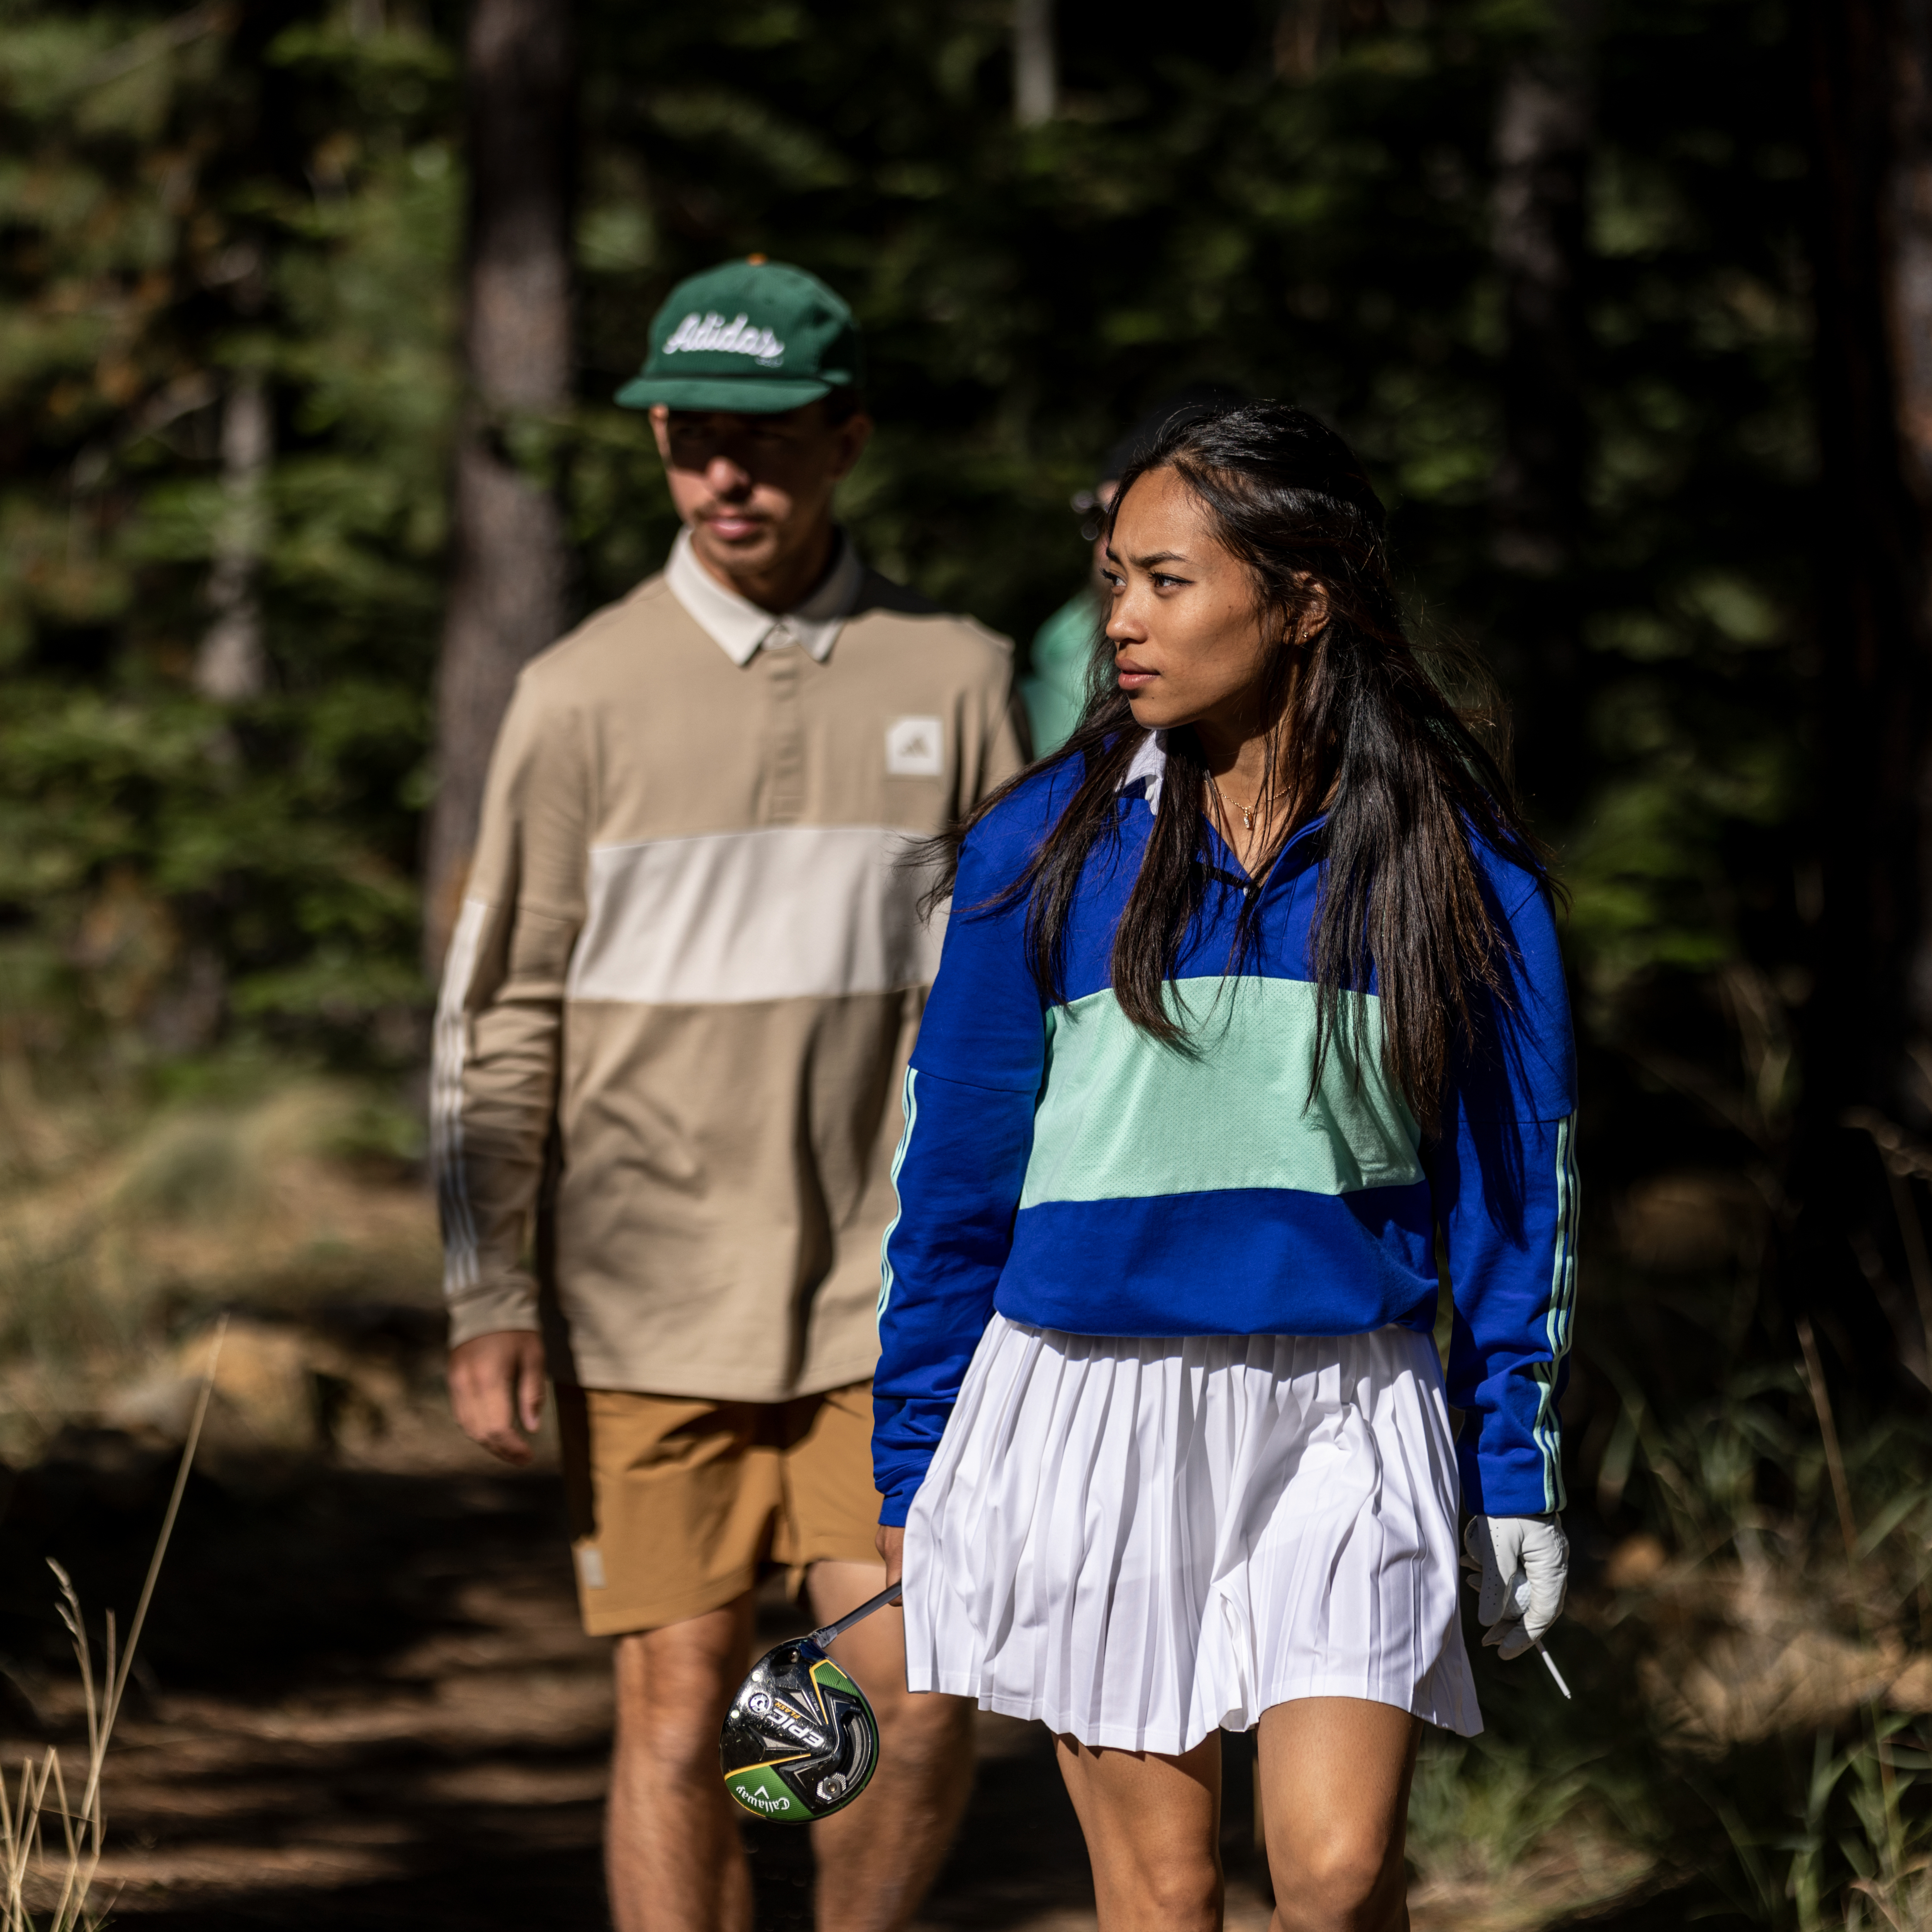 Adidas 90s outdoor wear-inspired Adicross collection –